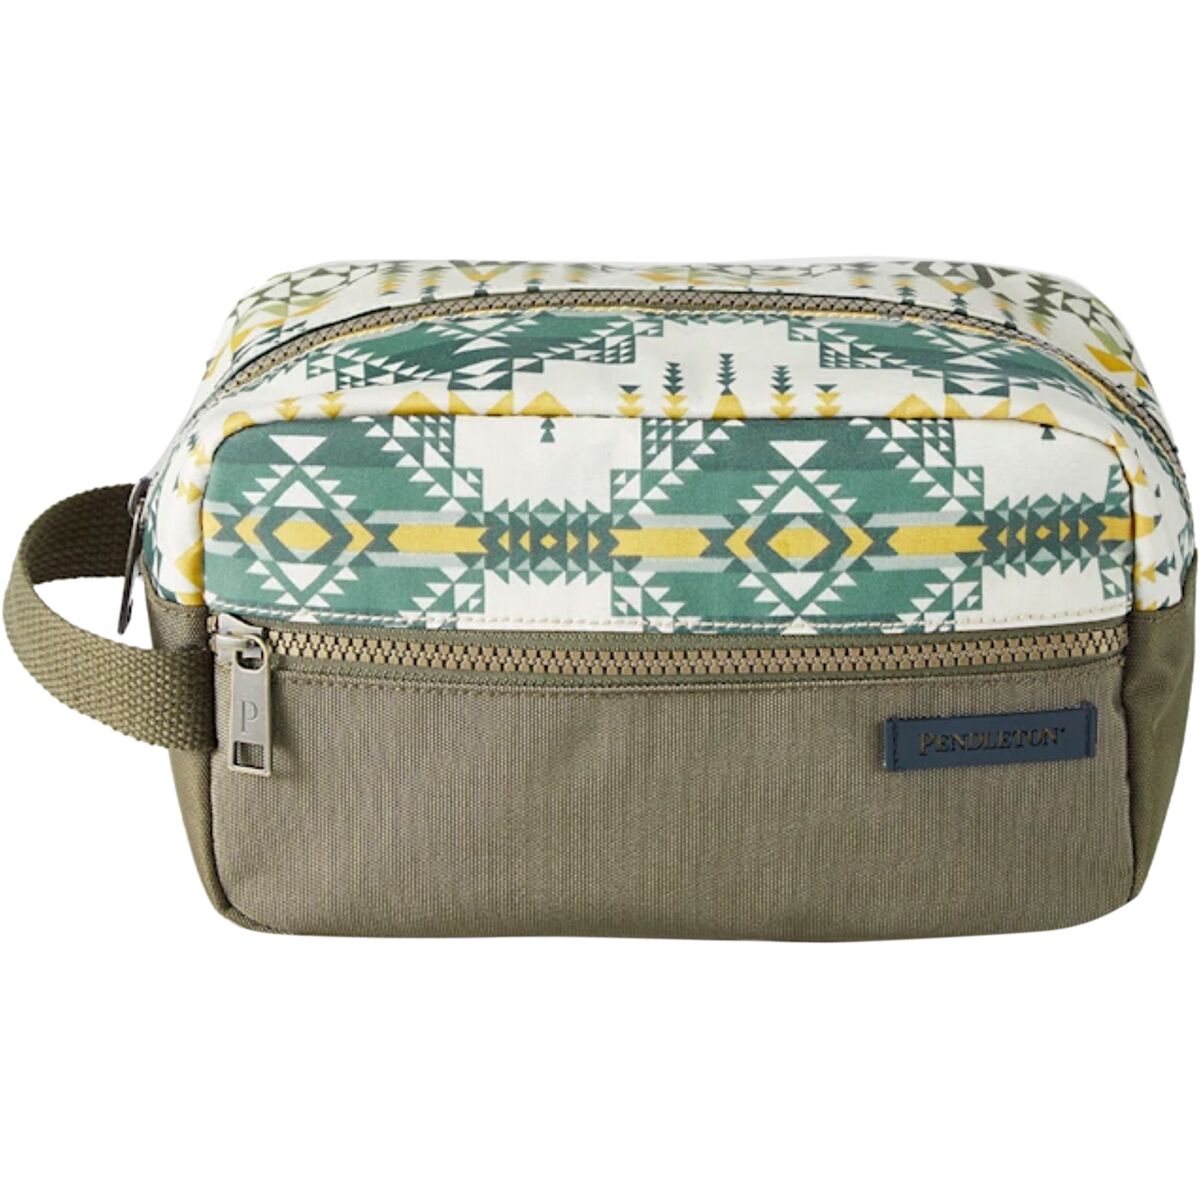 Pendleton Canopy Canvas Carryall Pouch